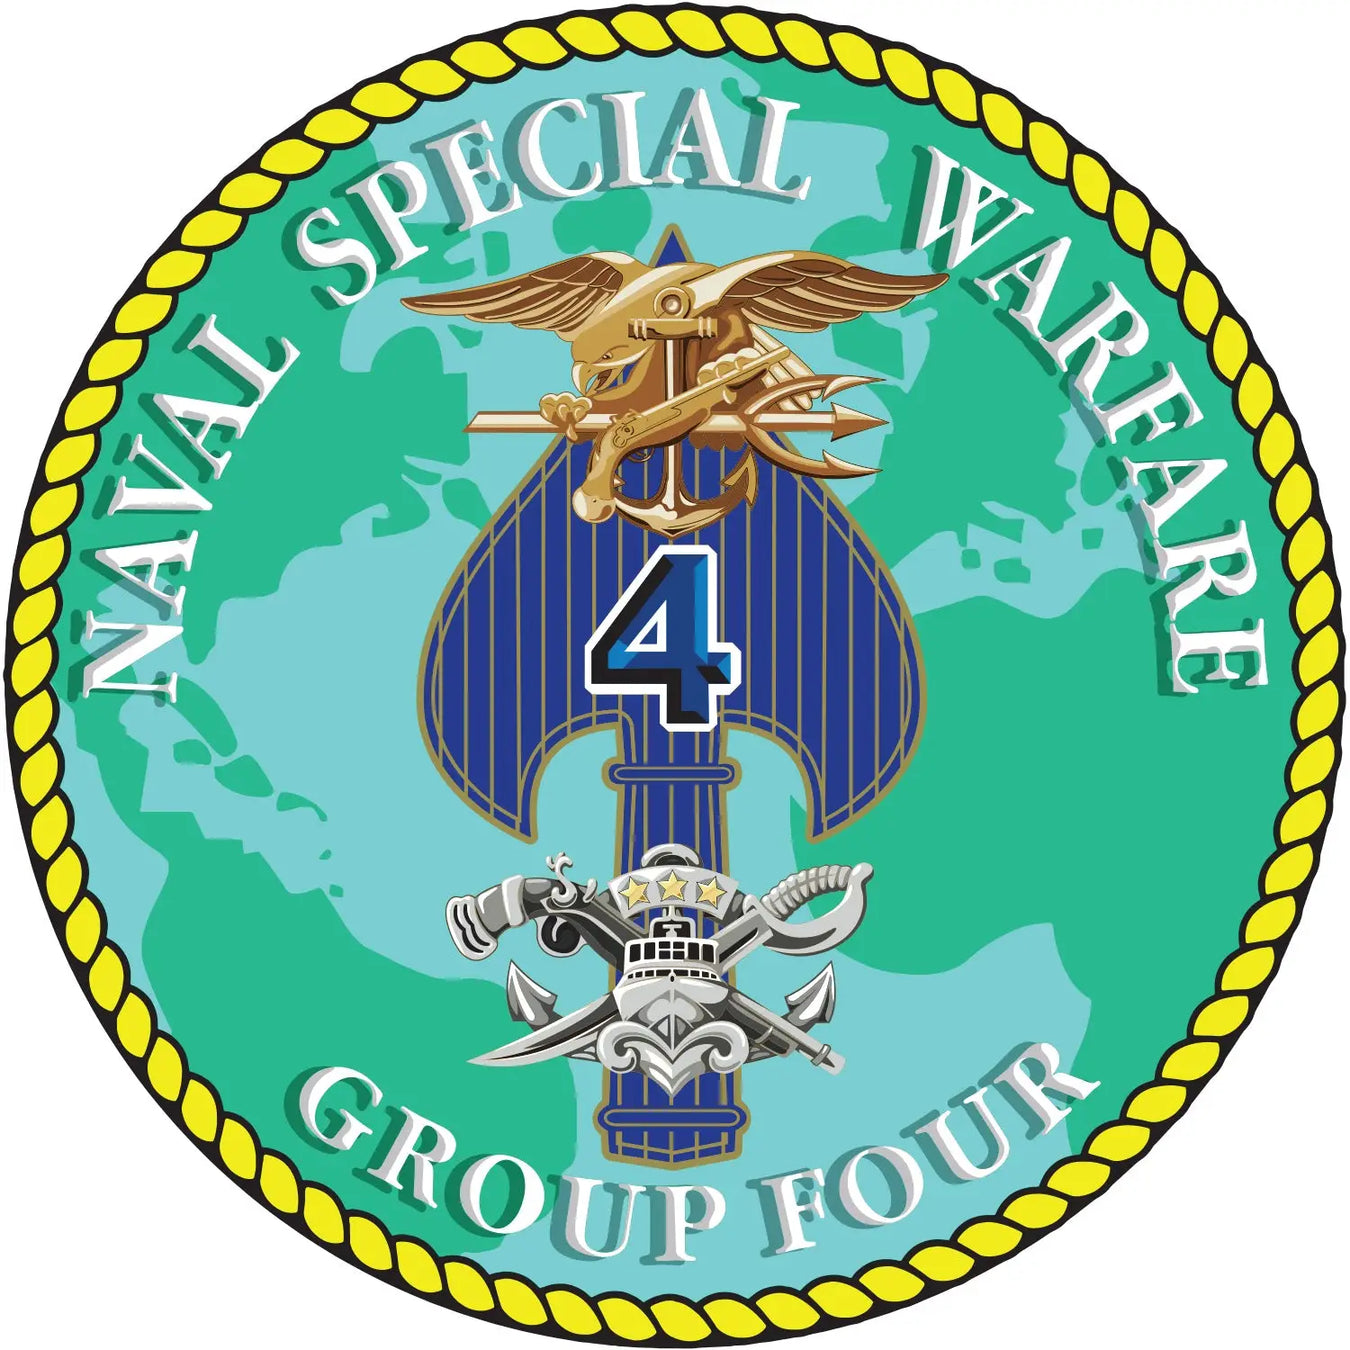 Naval Special Warfare Group 4 (NSWG-4)